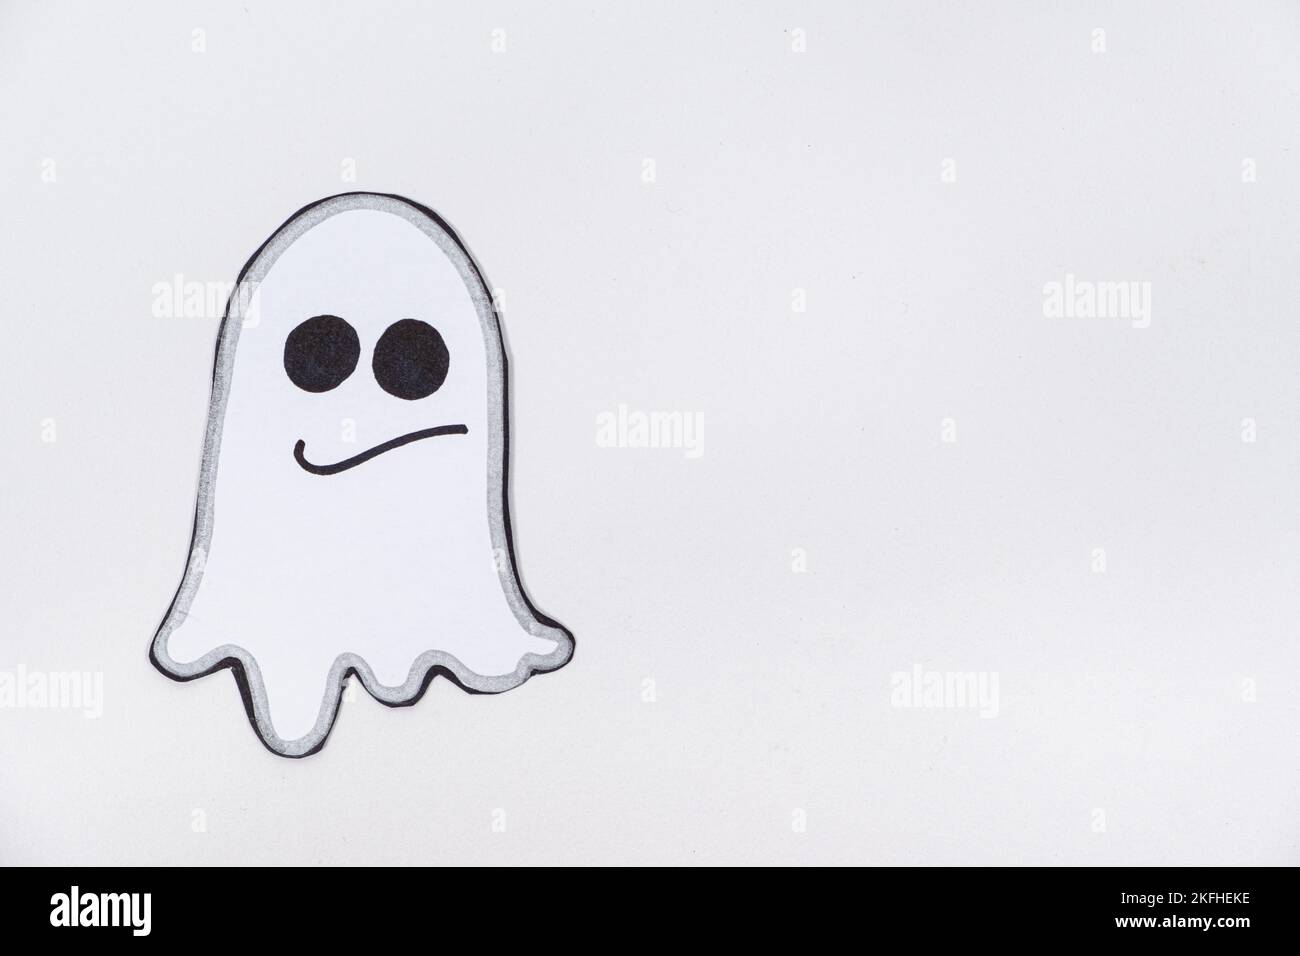 Funny paper ghost with eyes and mouth smiling on a white background, top view Stock Photo